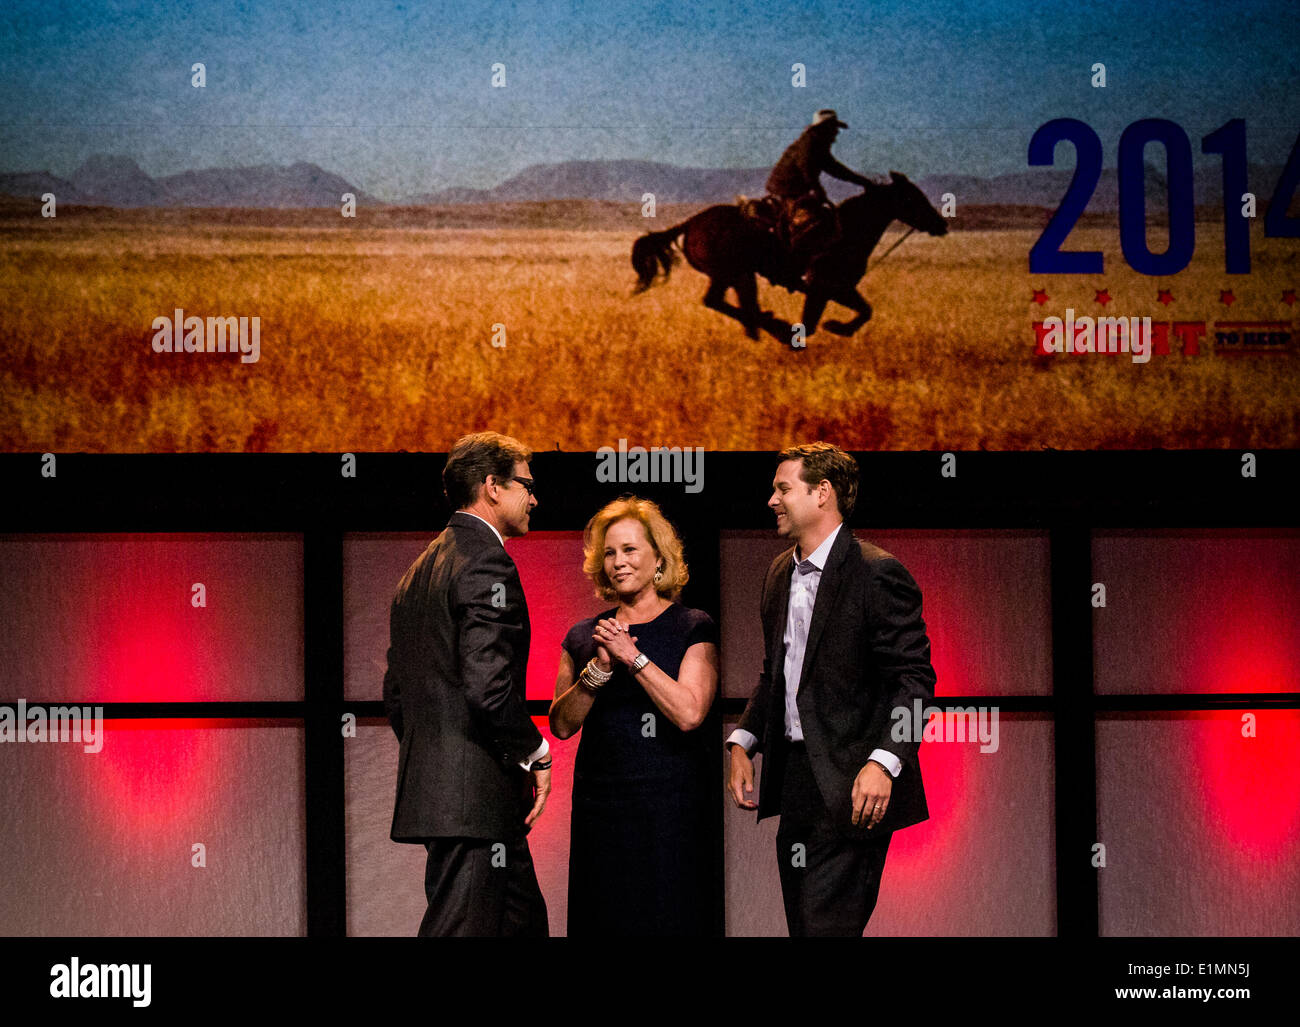 Ft, Worth, USA - 5 June 2014 - Republican GOP party state meeting hears Gov. Rick Perry tell how the nation needs to follow Texas as an example, greated at end by his wife, Anita T. Perry and Texas GOP chairman Steve Munisteri Credit:  J. G. Domke/Alamy Live News Stock Photo